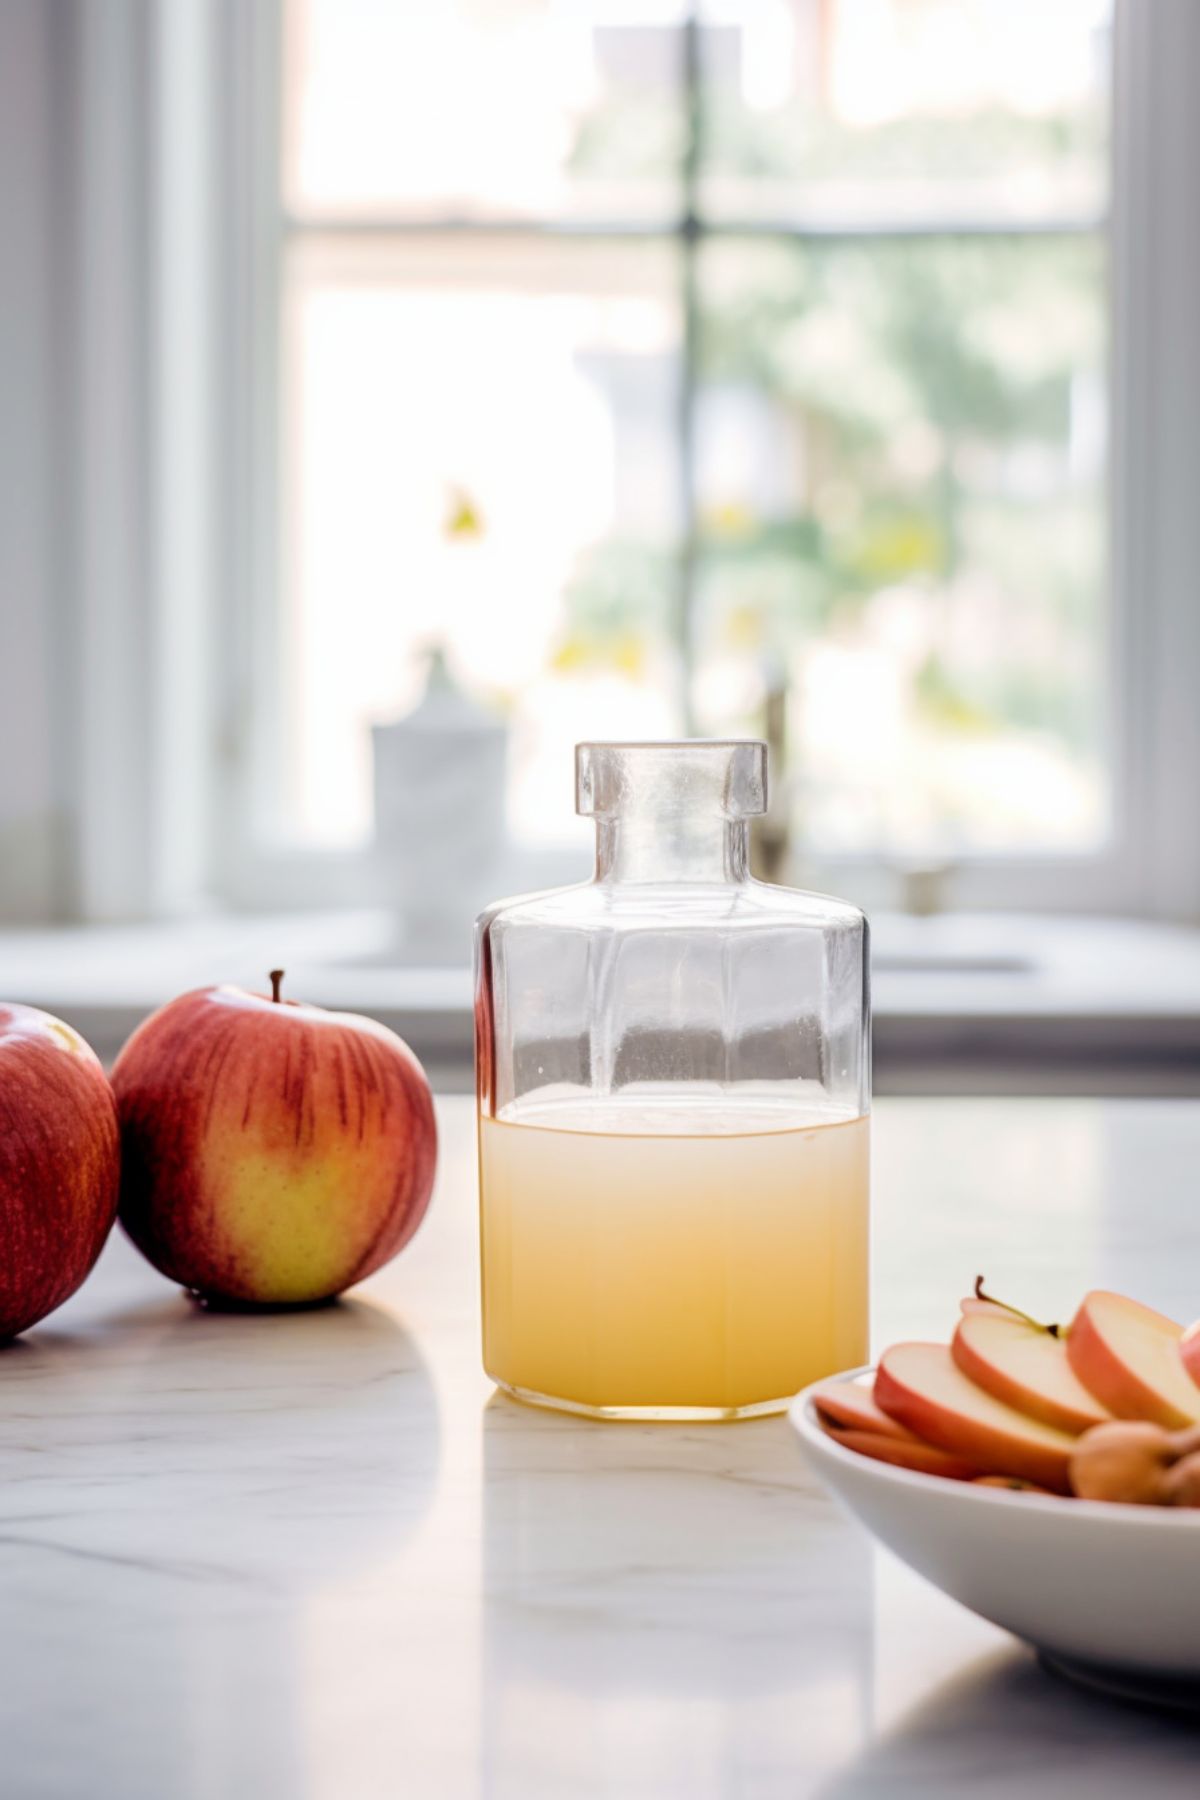 Apple cider vinegar in a glass jar with apples in the background.